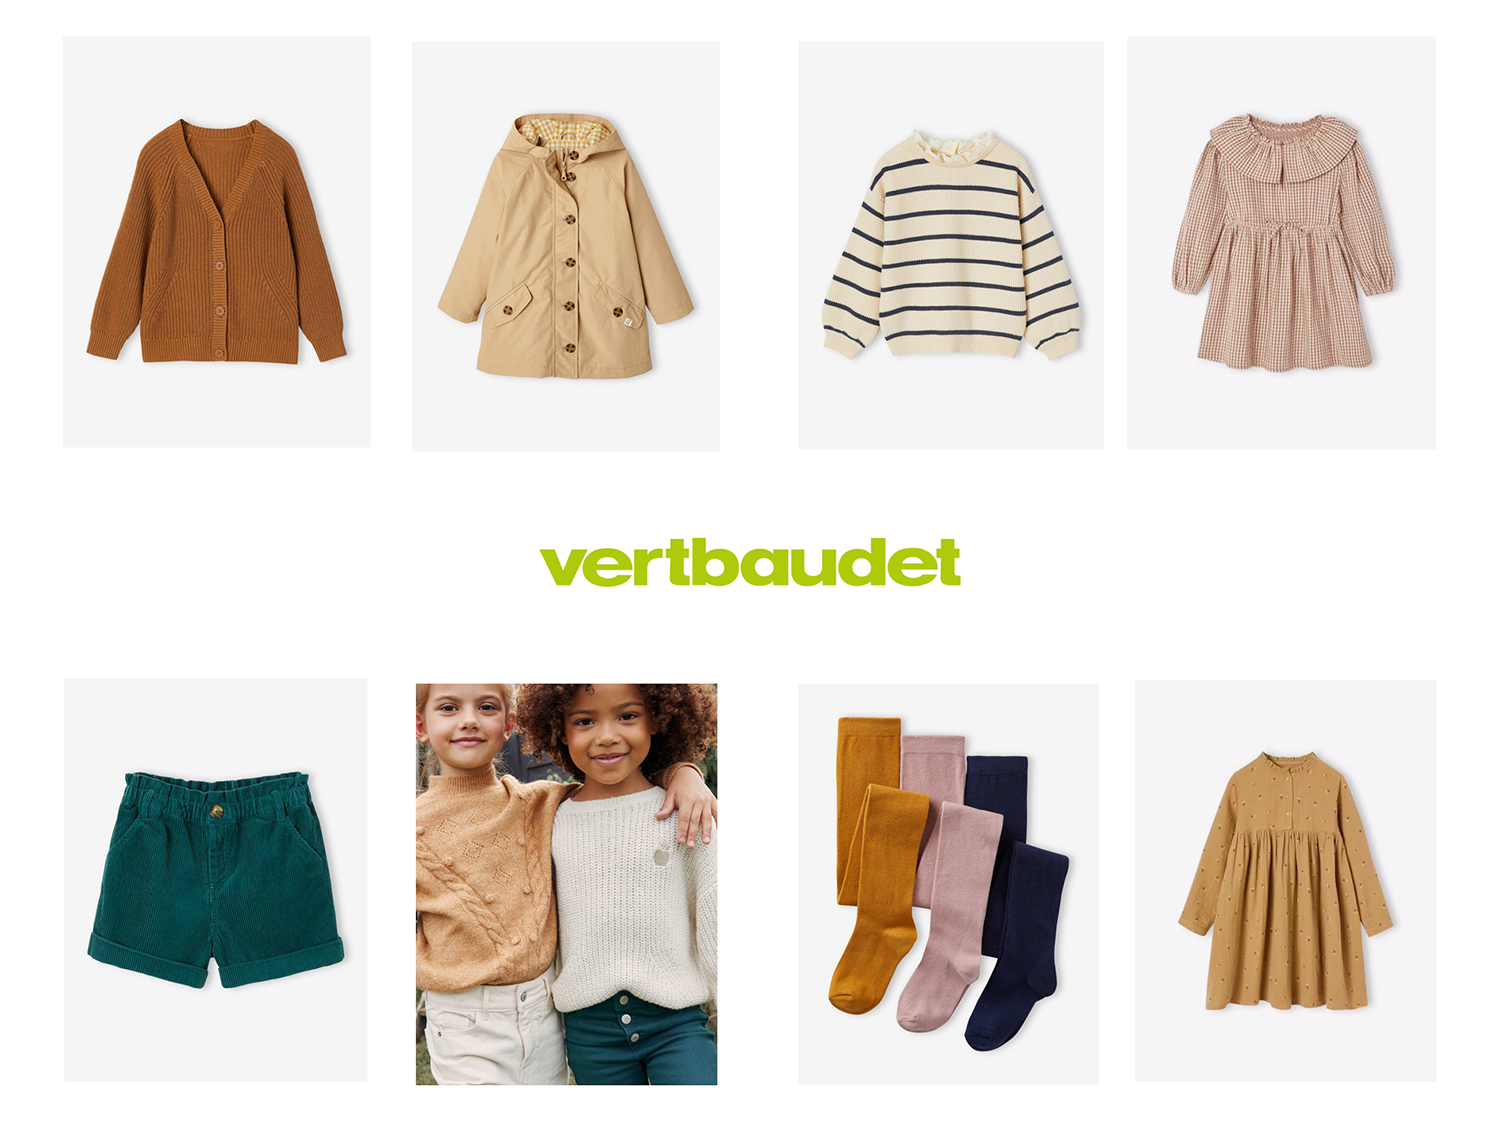 vertbaudet girls clothing collage - autumn wardrobe what to wear to a photoshoot 